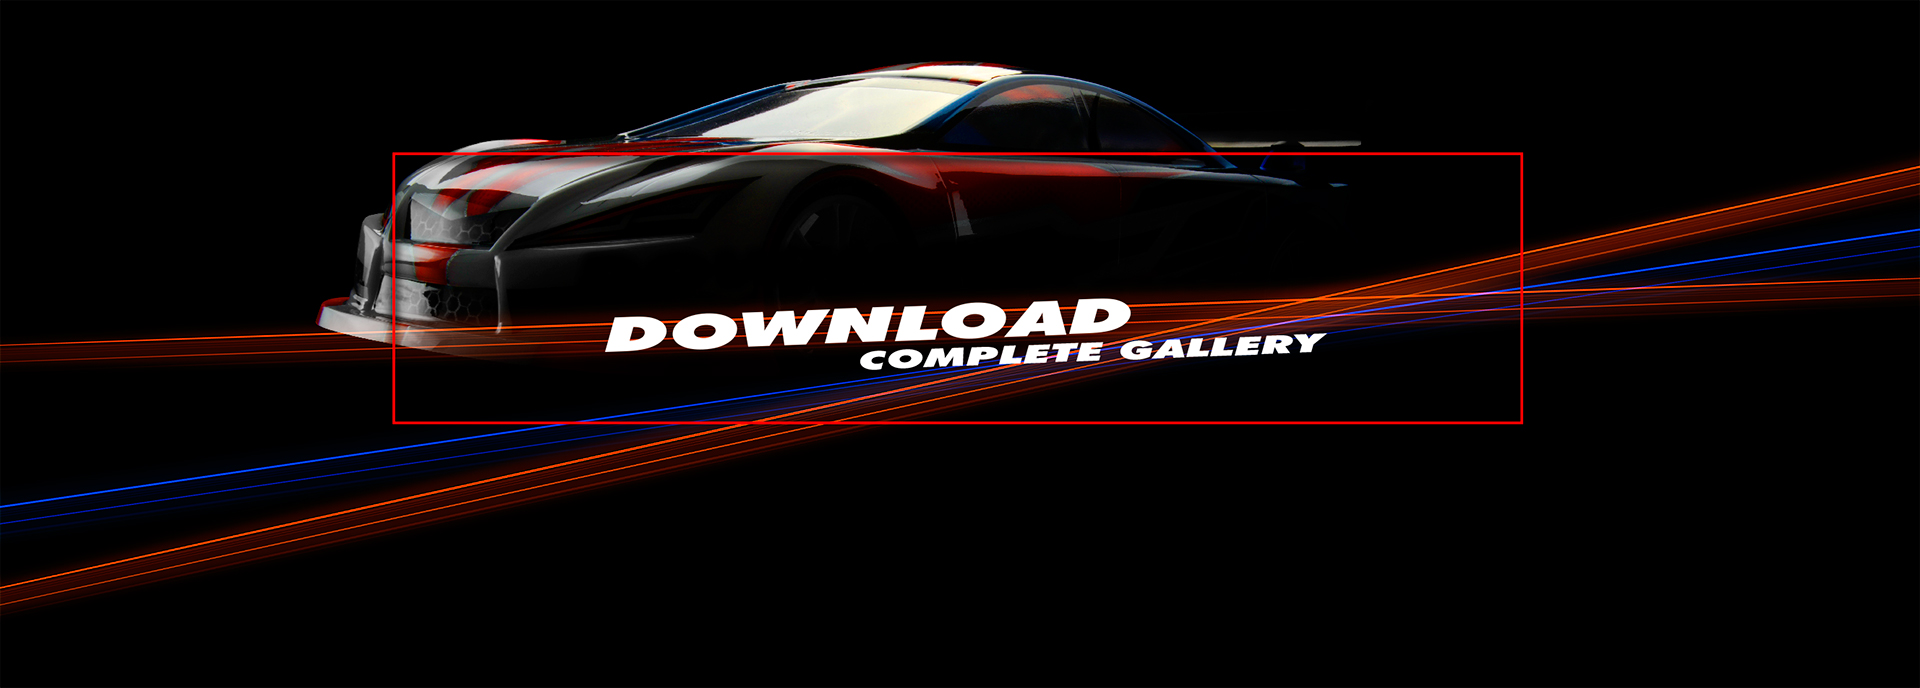 Download complete gallery